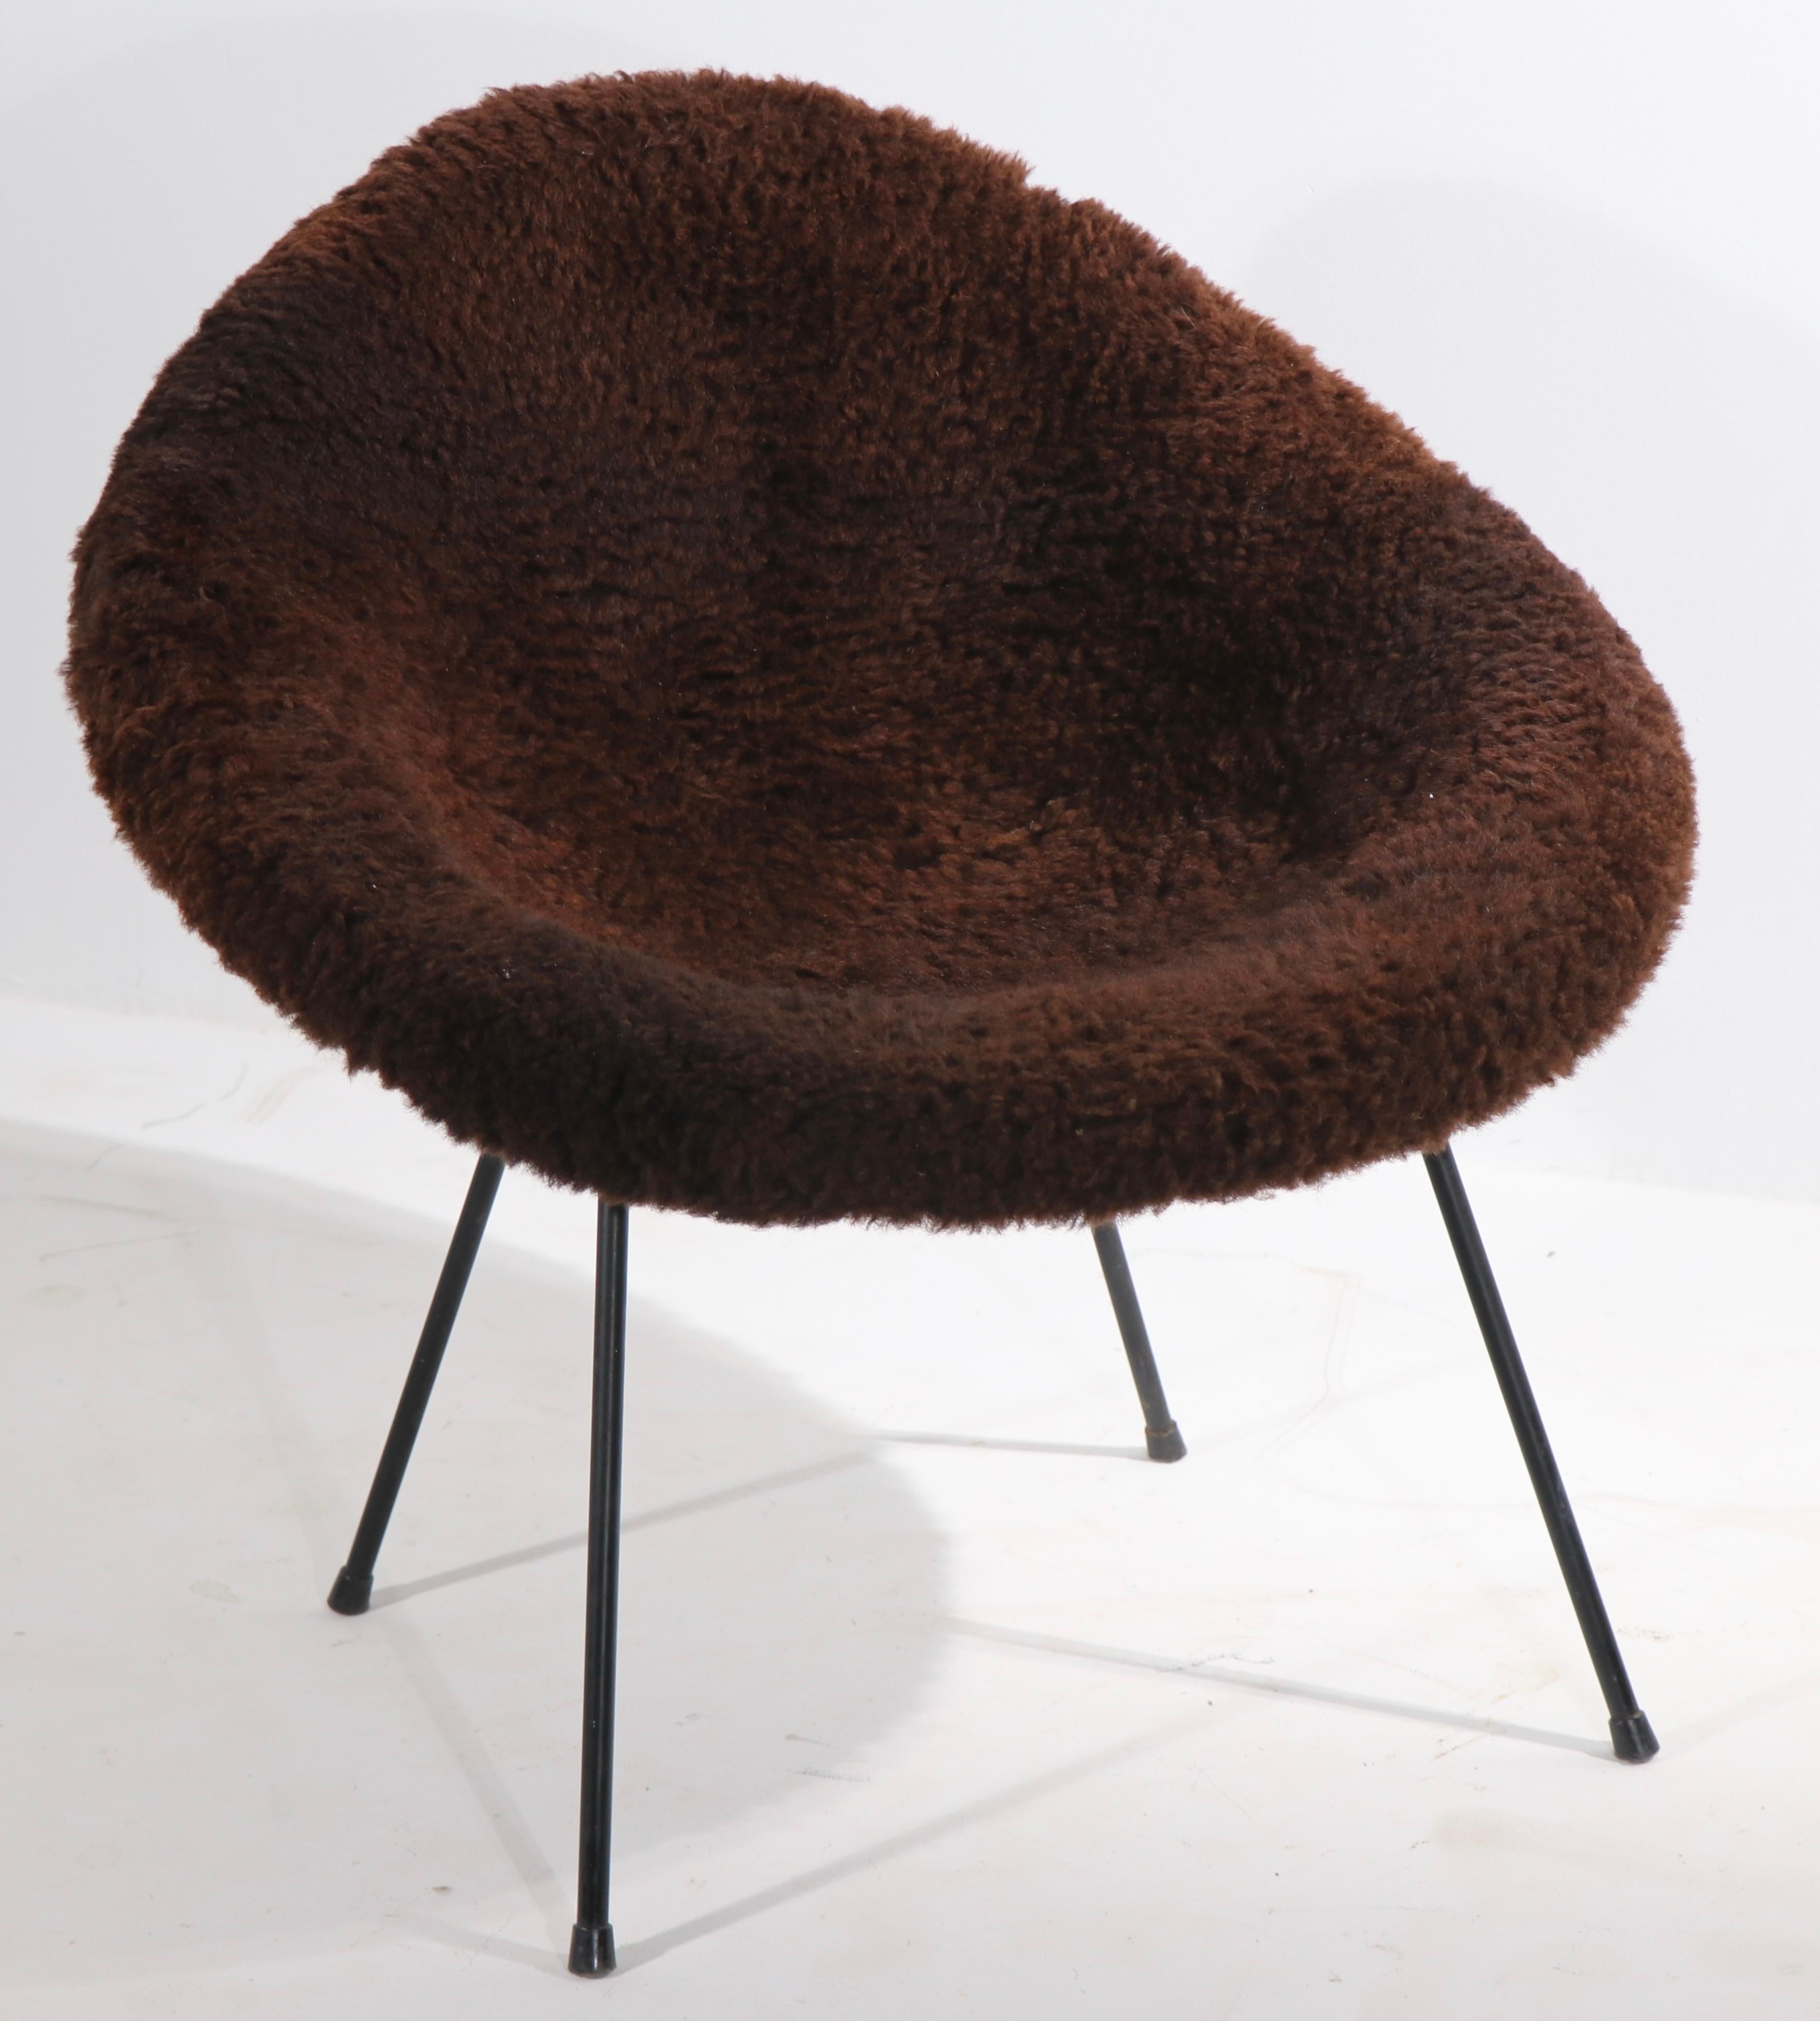 Chic and stylish bucket chair, in brown shag upholstery, marked Sindri, Made in Iceland. This example is in very good, original condition, clean and ready to use.